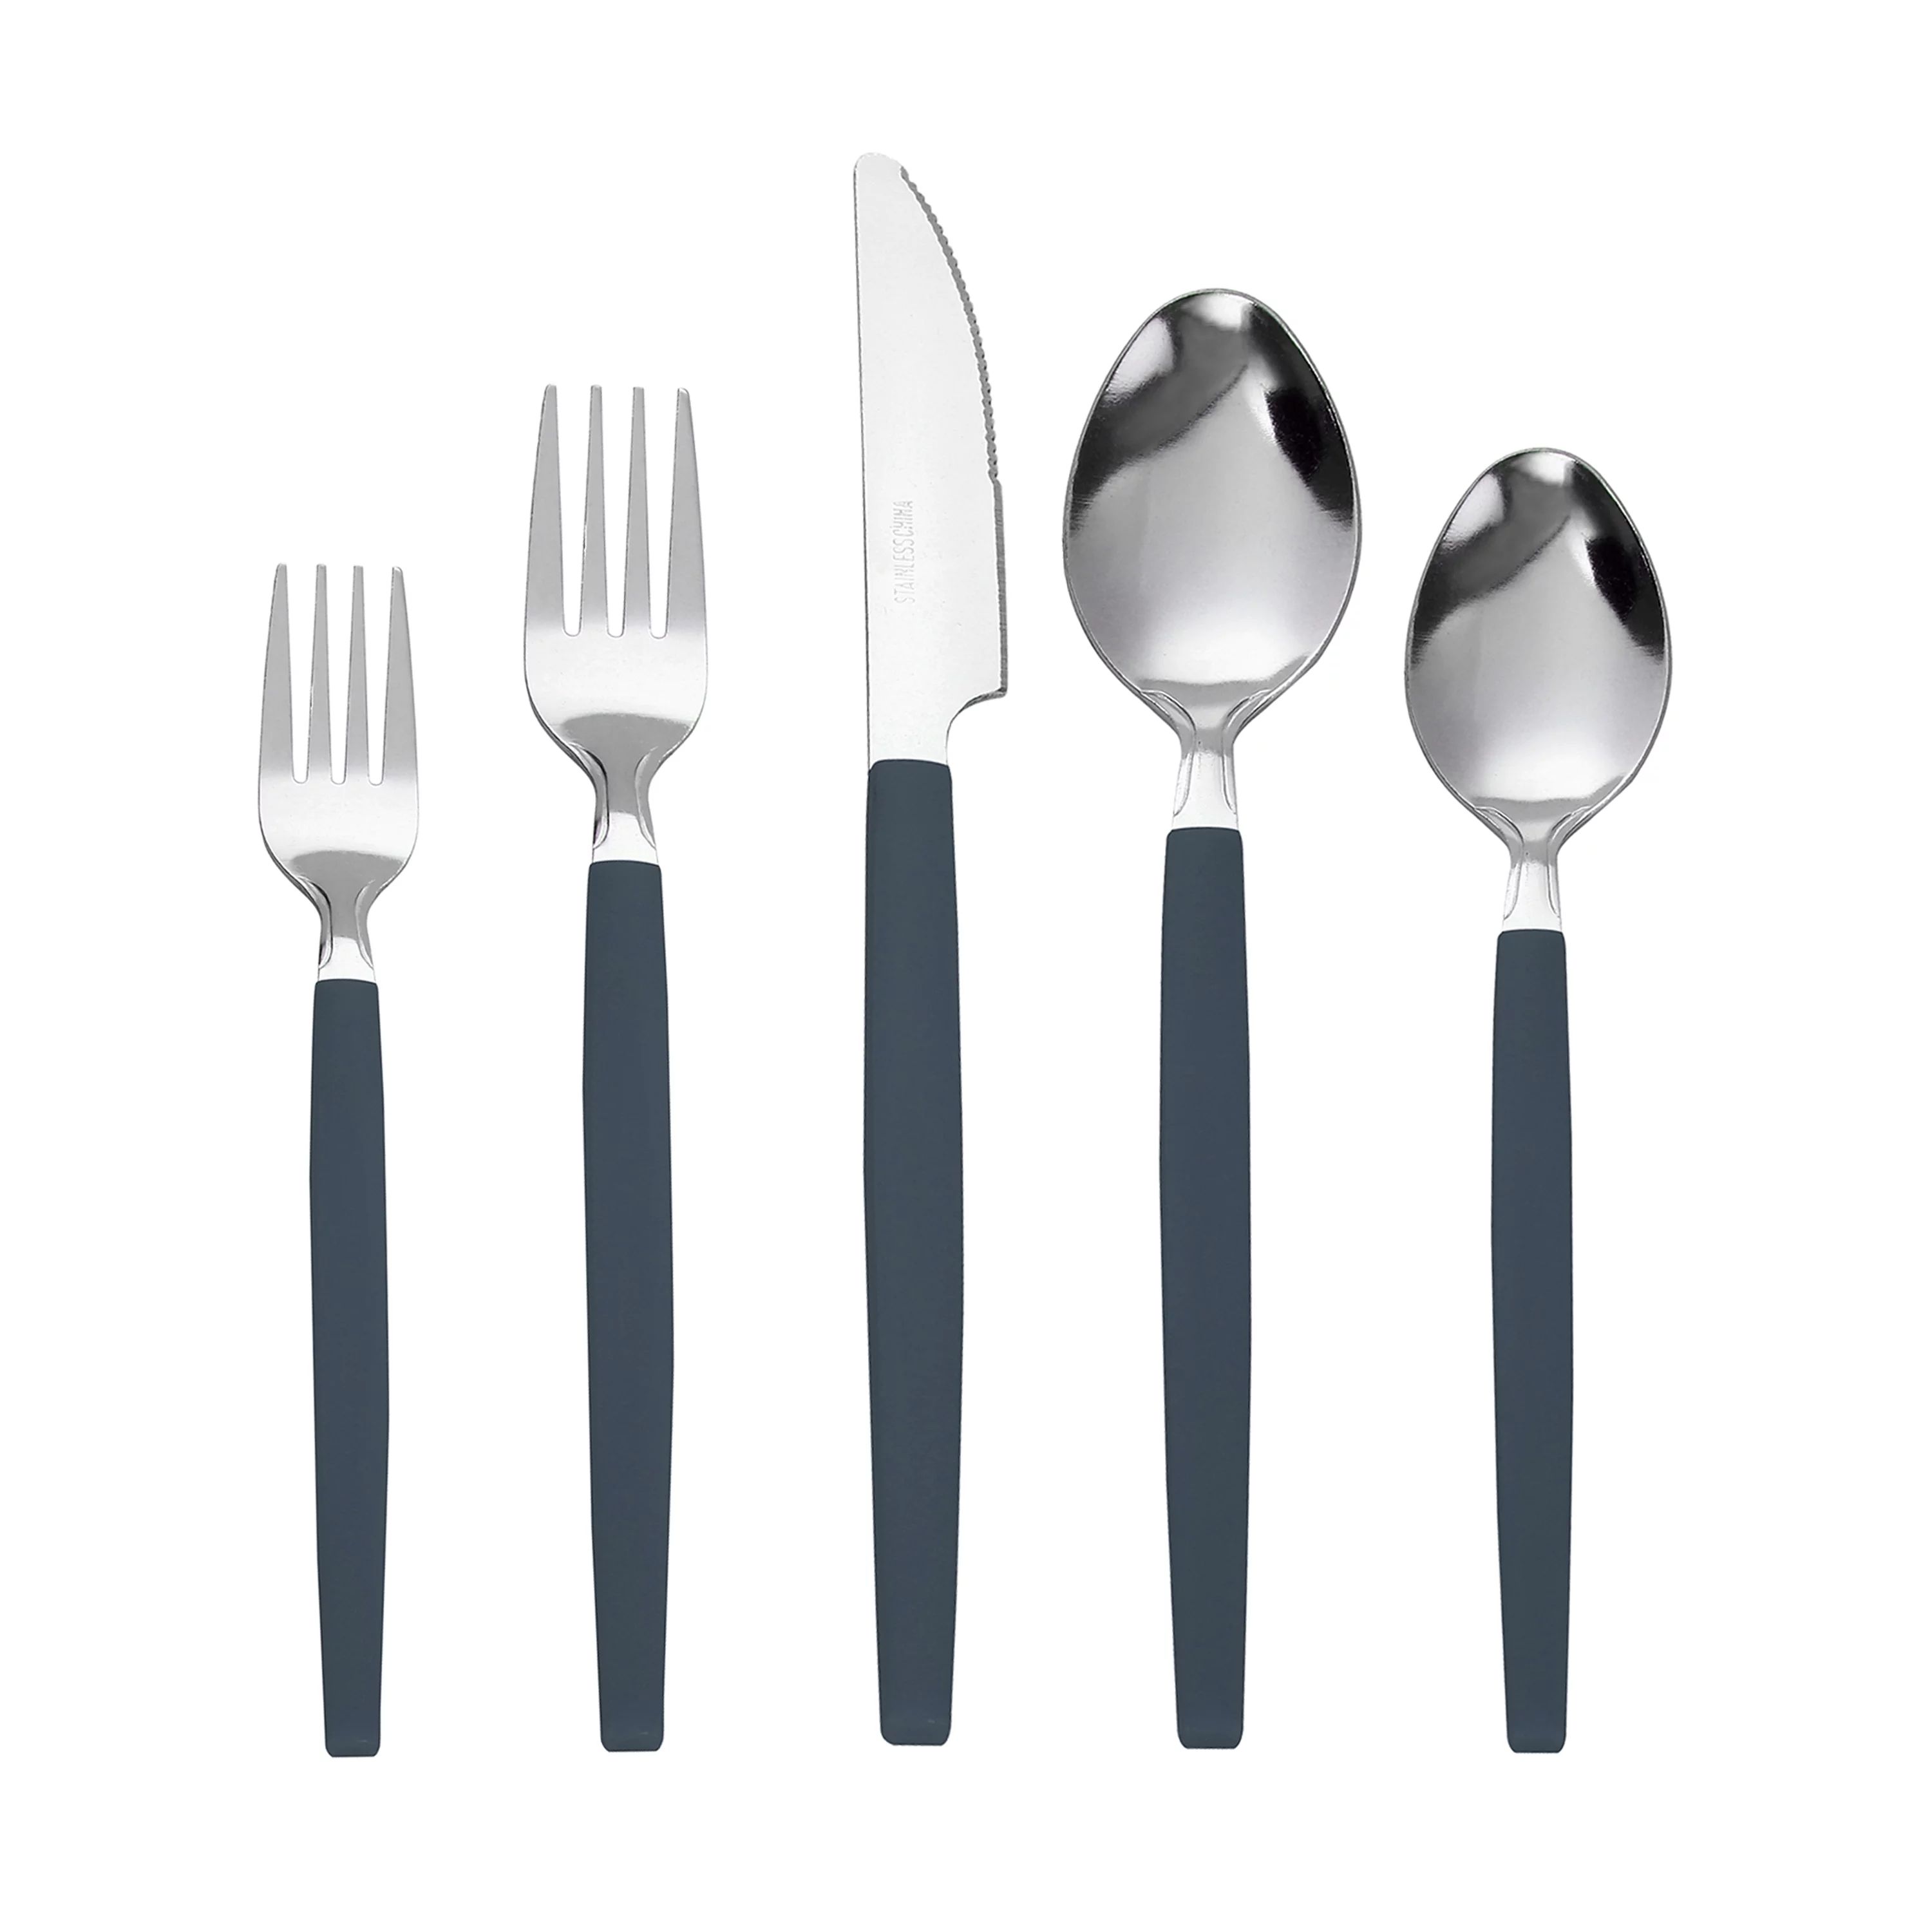 Mainstays 49 Piece Stainless Steel and Plastic Flatware Set with Tray, Cherry Blossom | Walmart (US)